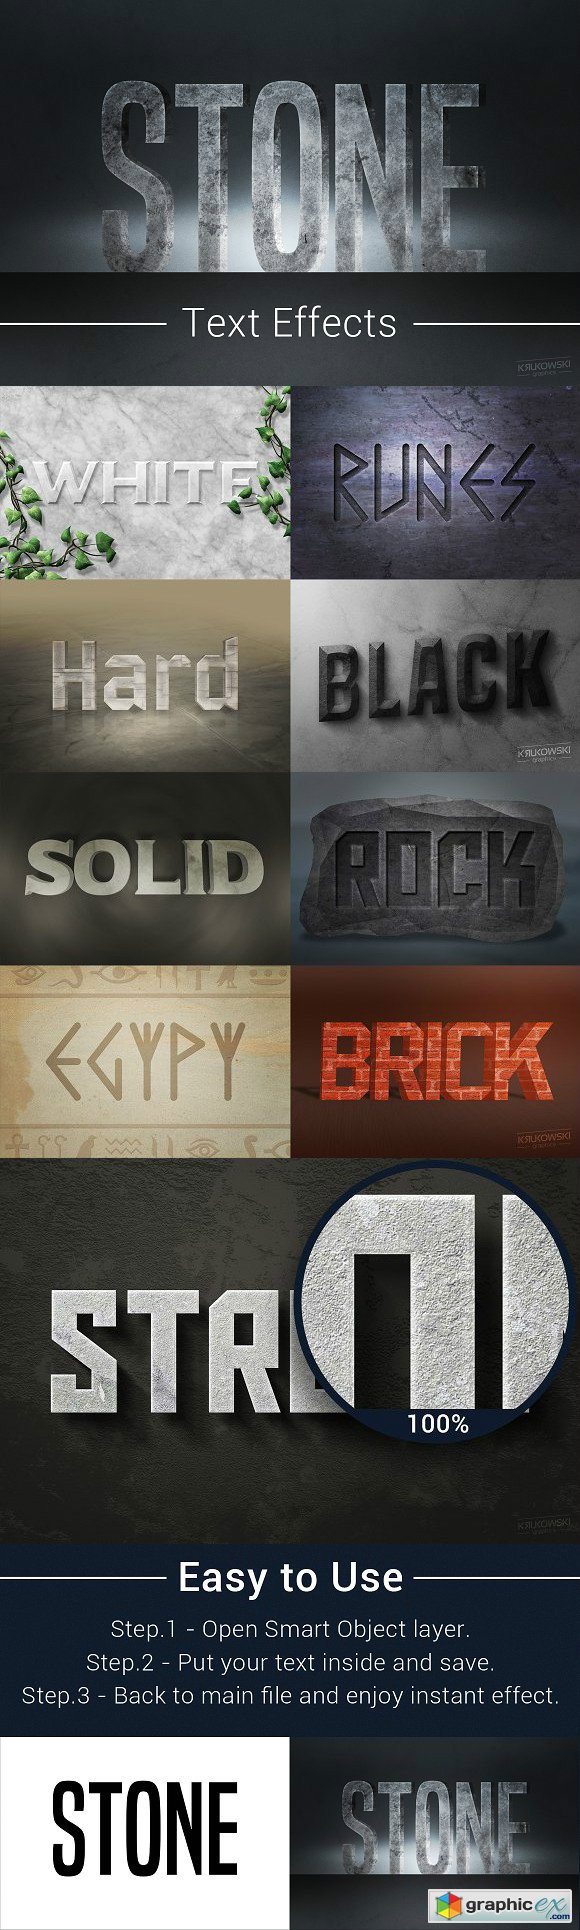 Stone Text Effects Mockup